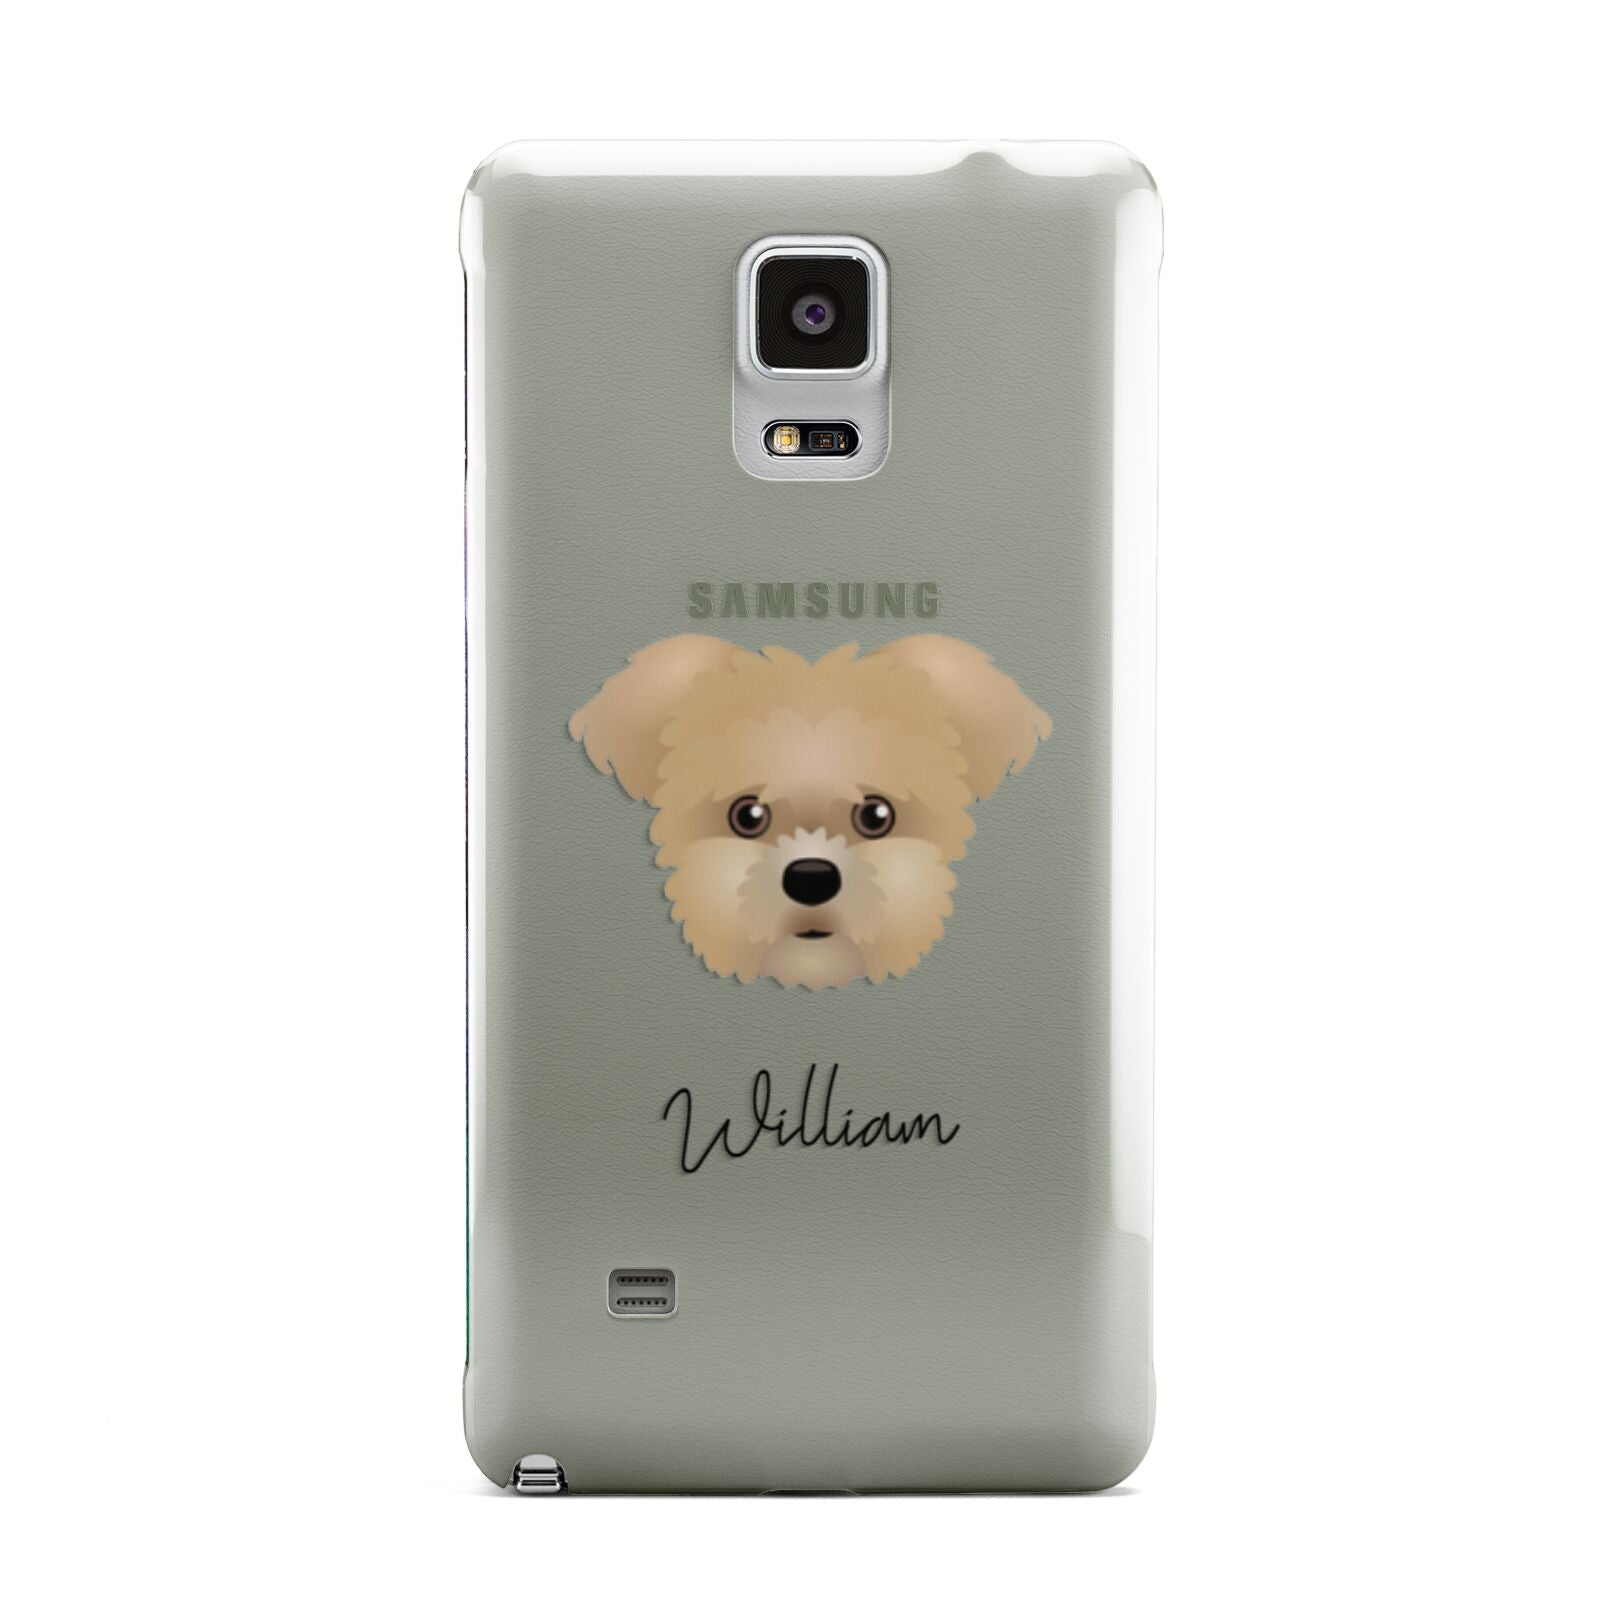 Morkie Personalised Samsung Galaxy Note 4 Case